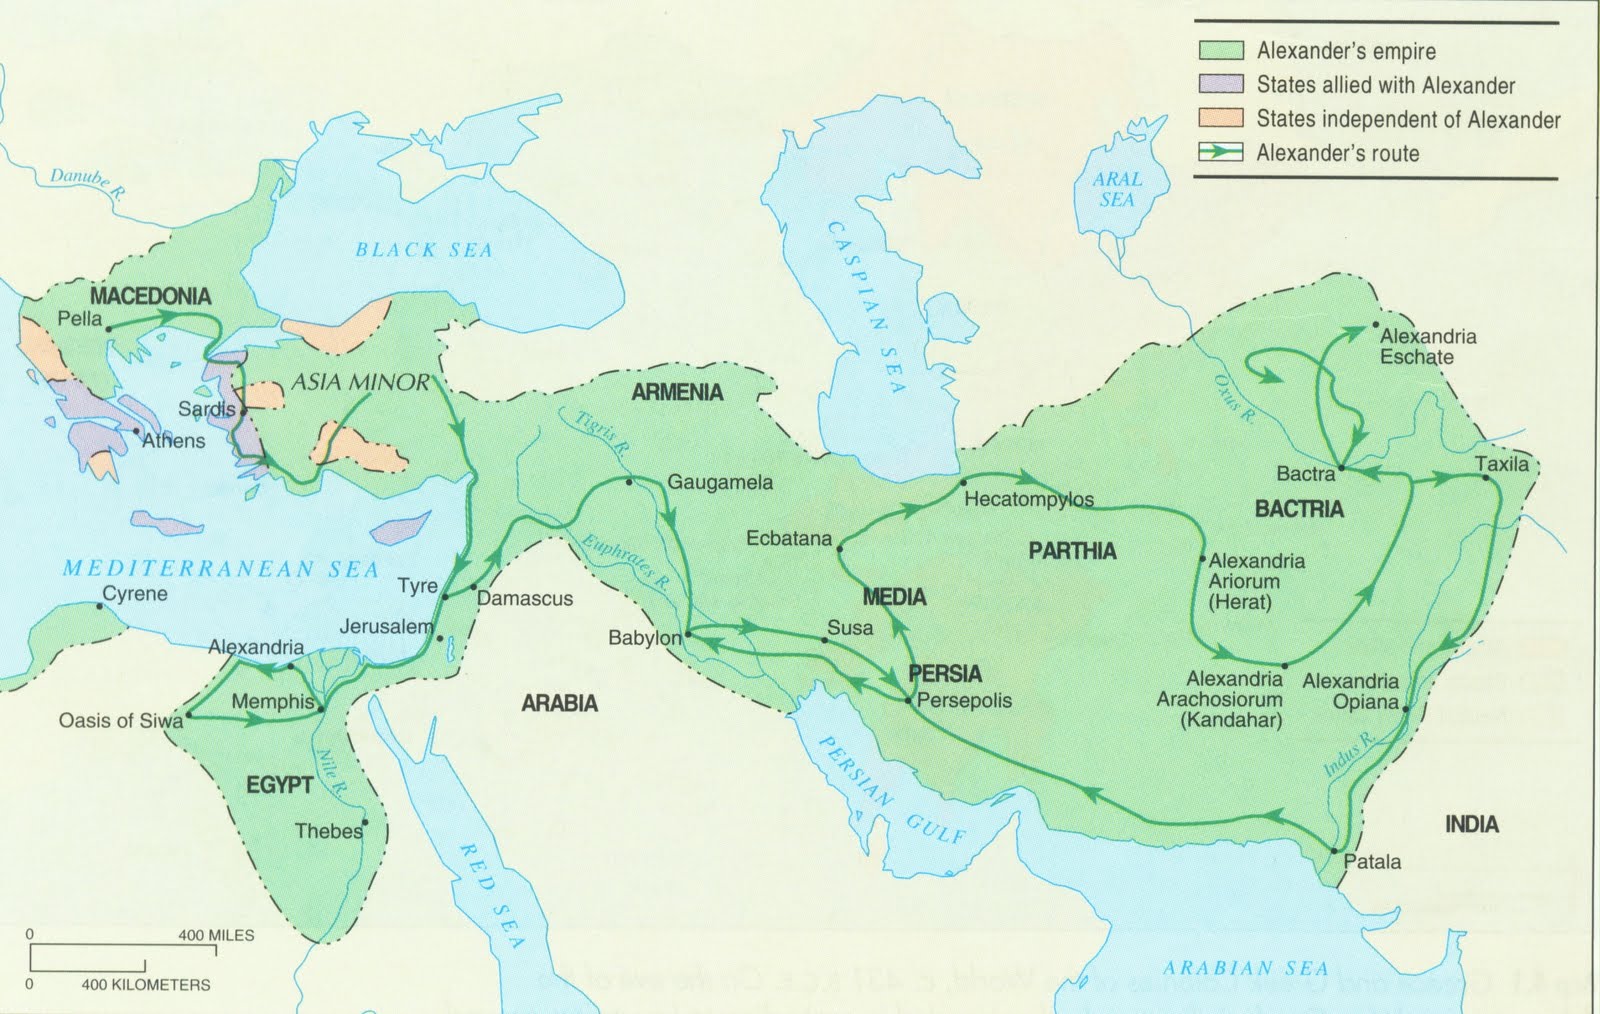 Empire and route of Alexander